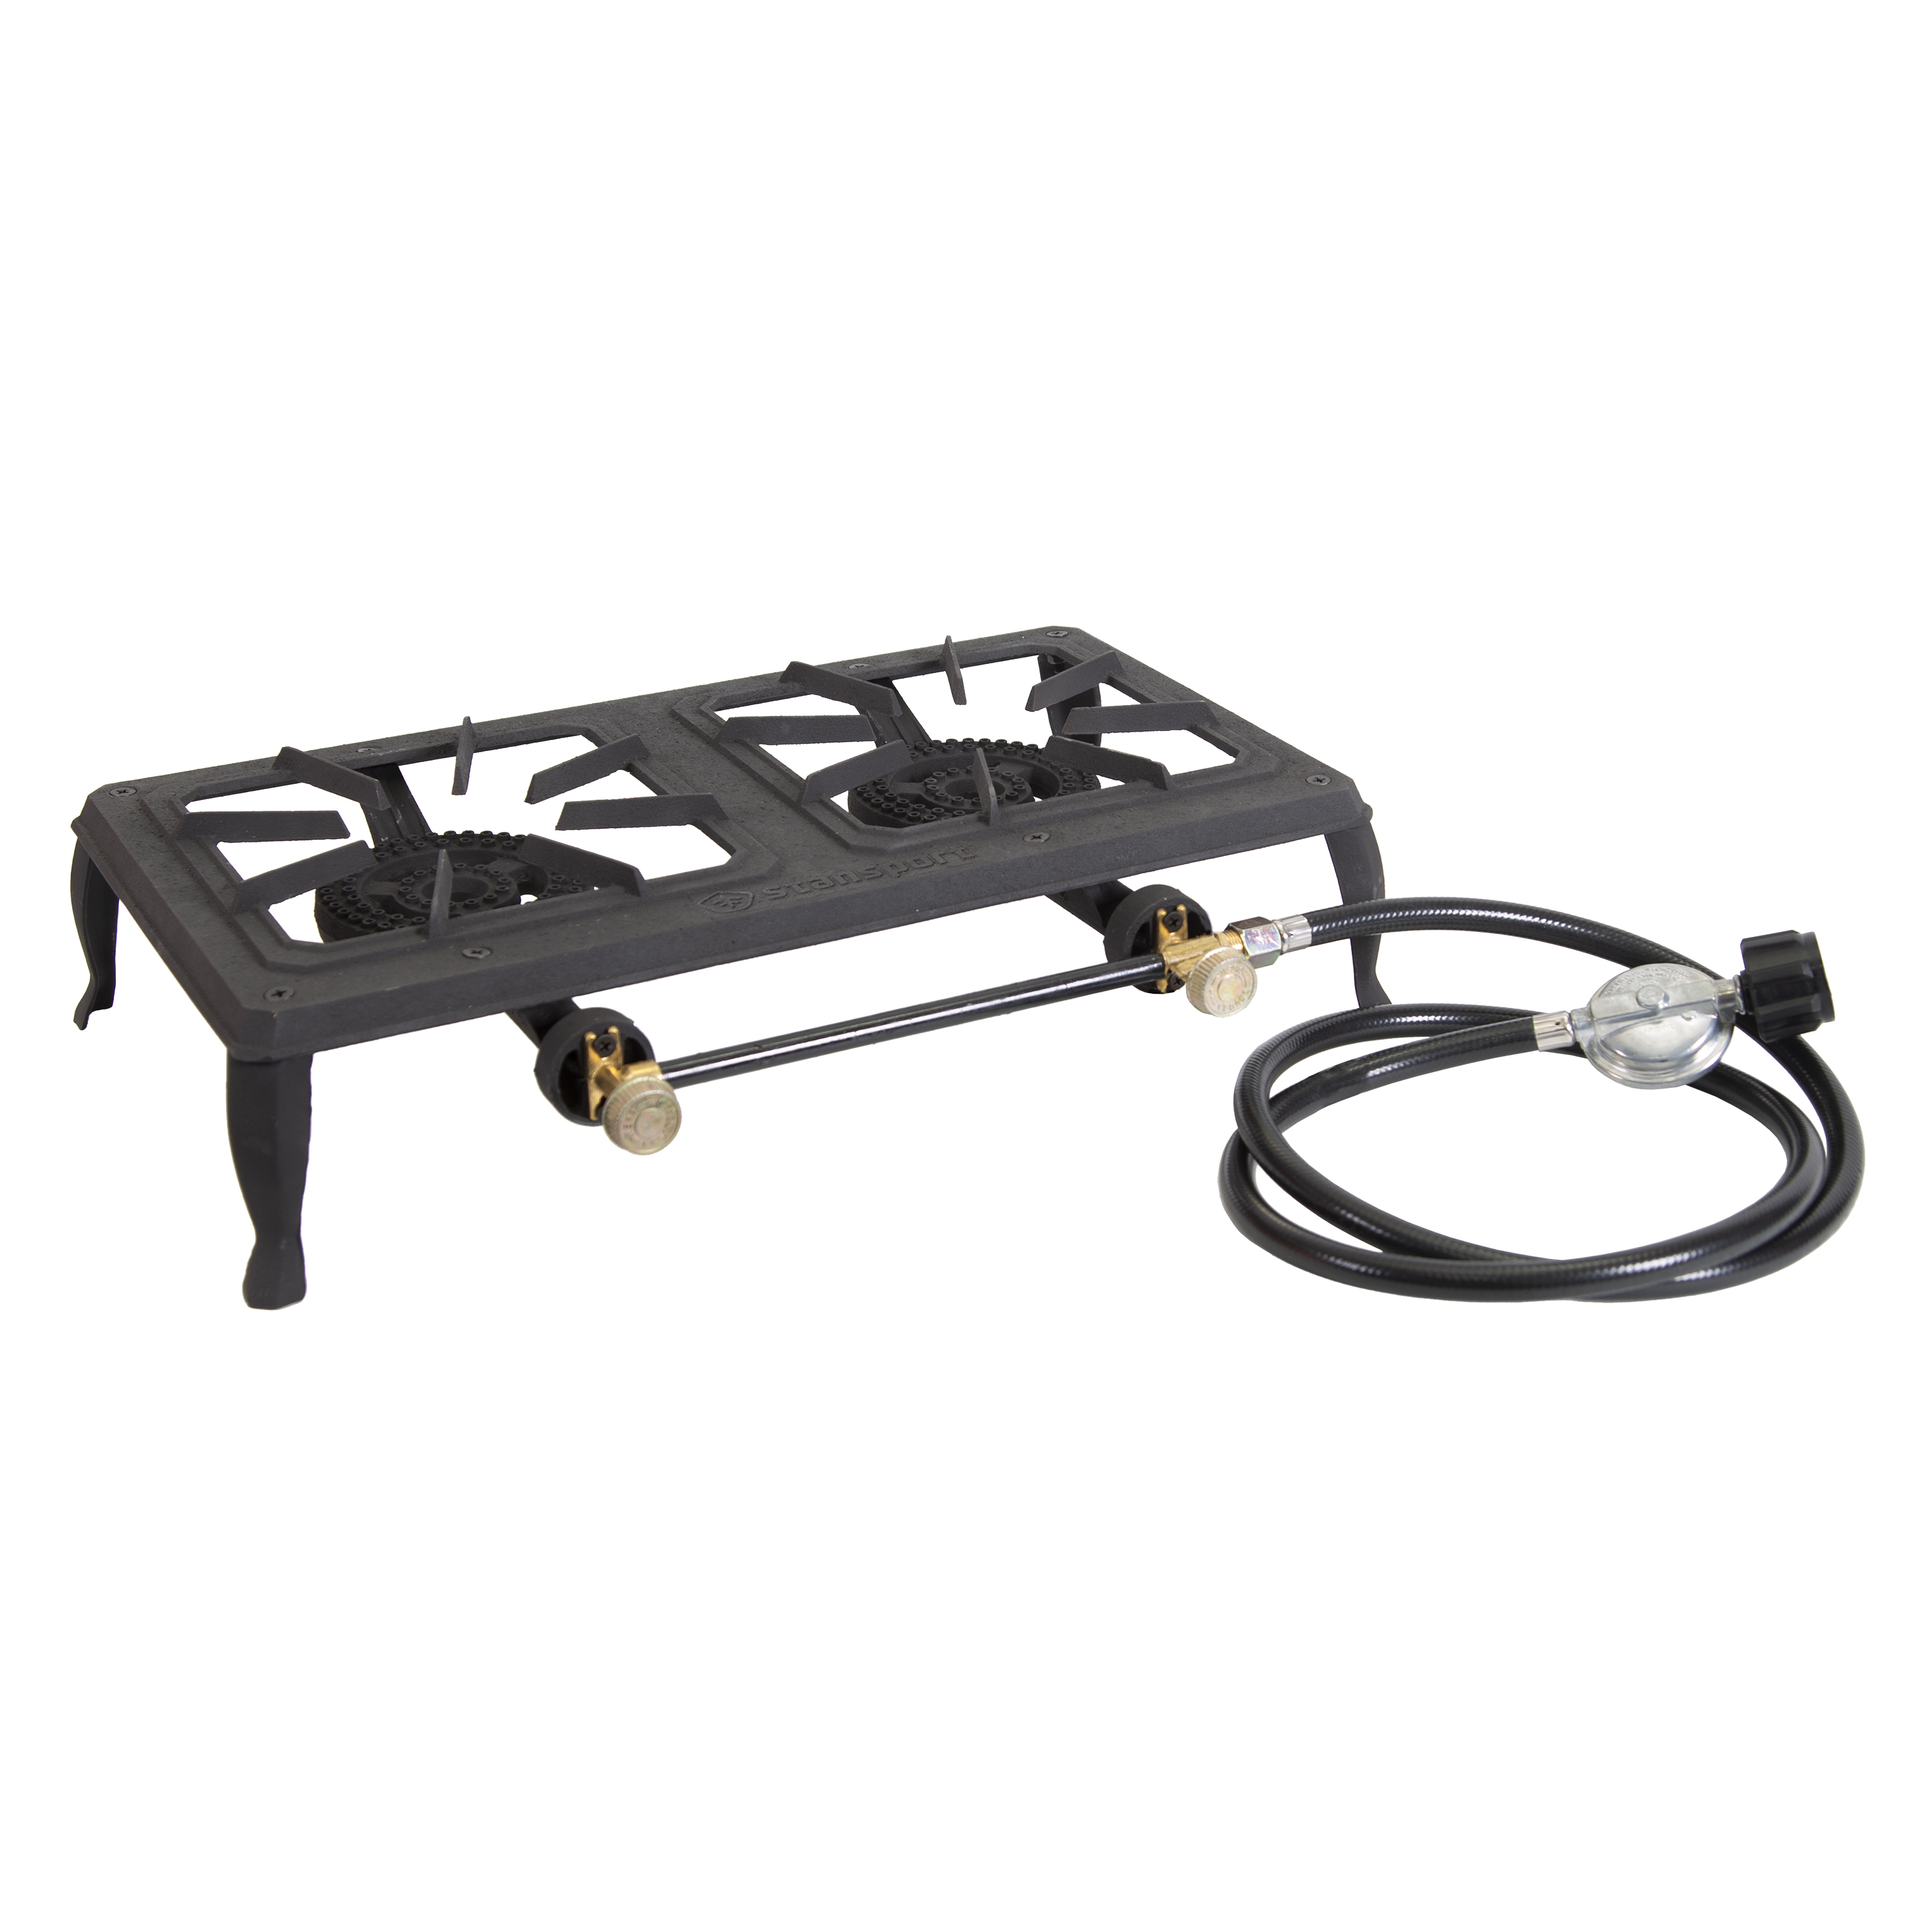 Stansport 209-100 Double Burner Cast Iron Stove with Regulator Hose - 2 Burners For Propane Use - image 2 of 6